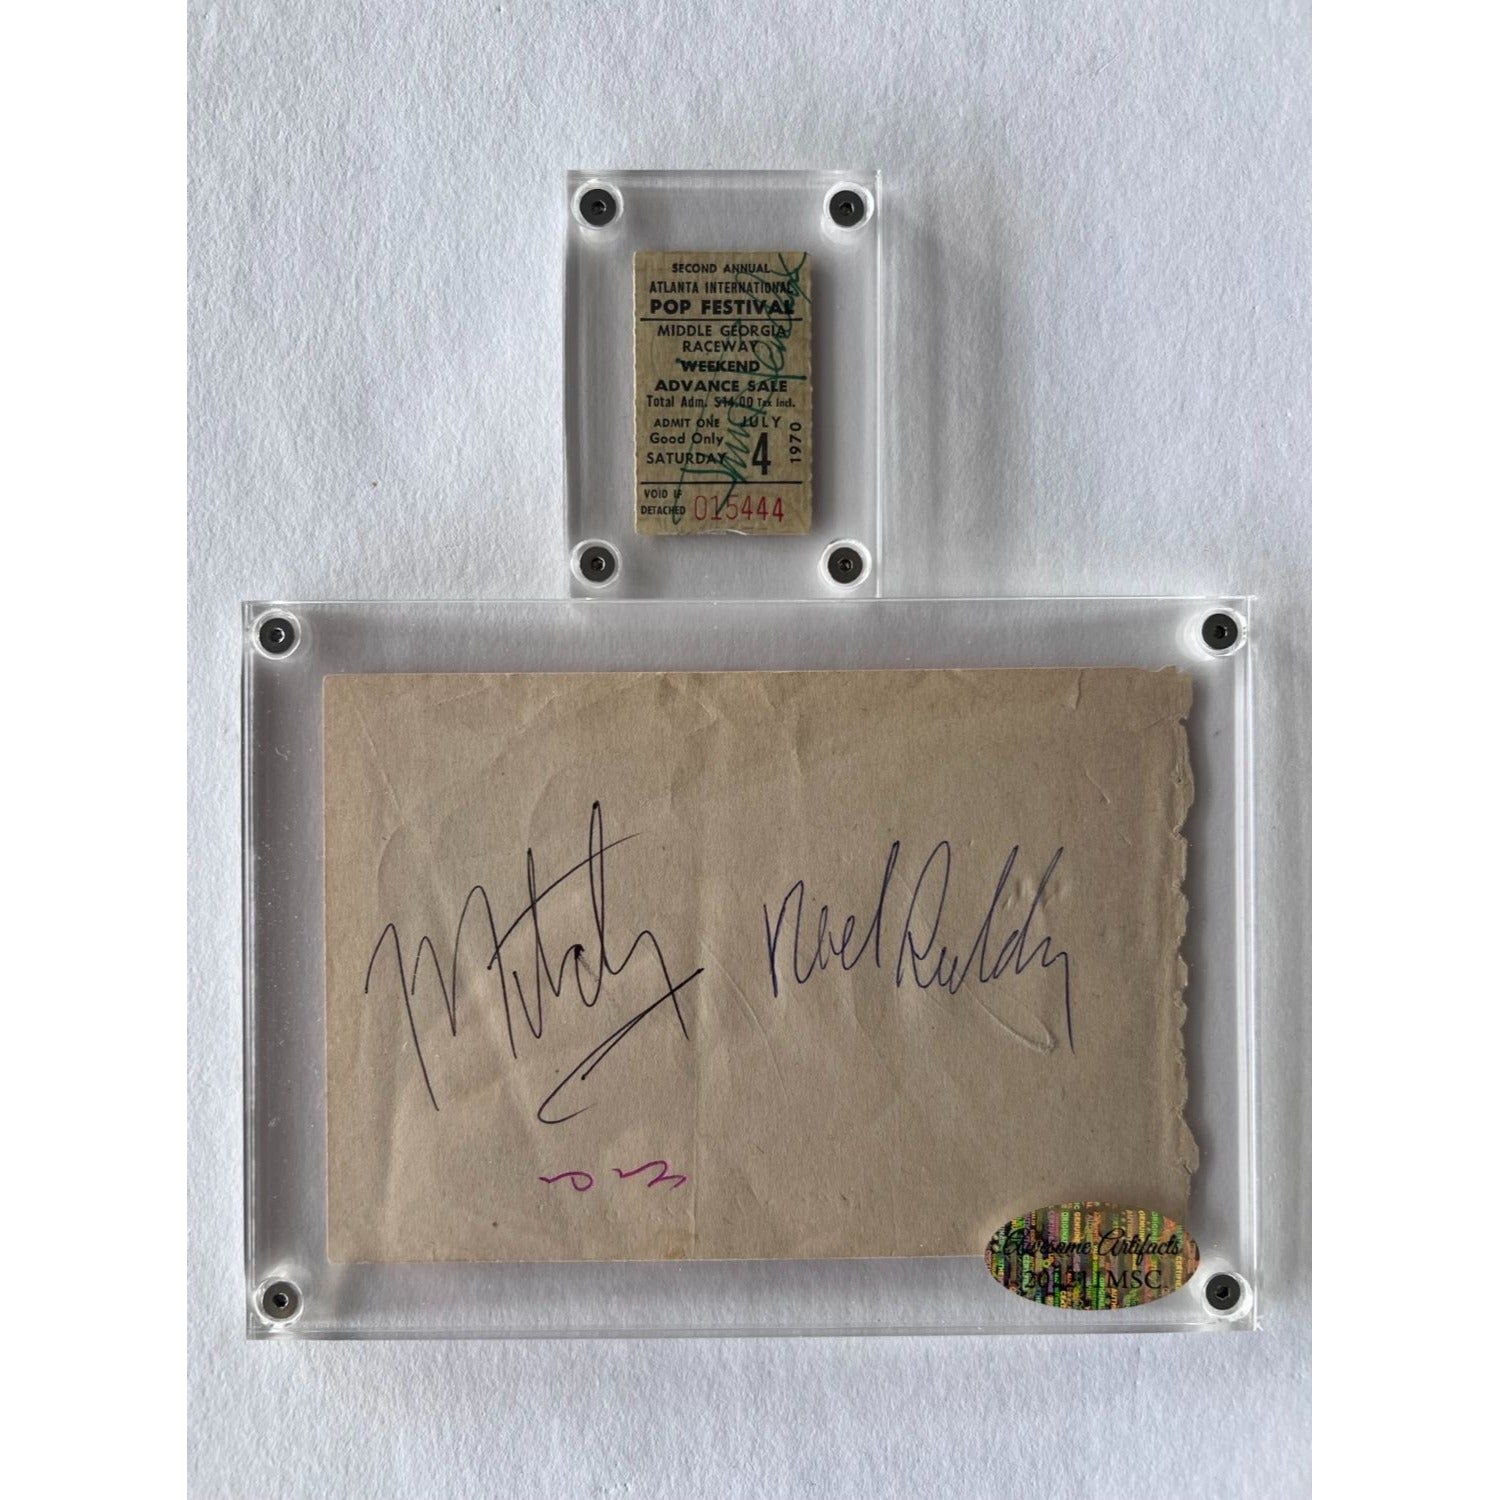 Jimi Hendrix, drummer Mitch Mitchell, and bassist Noel Redding signed autograph book and concert ticket with proof